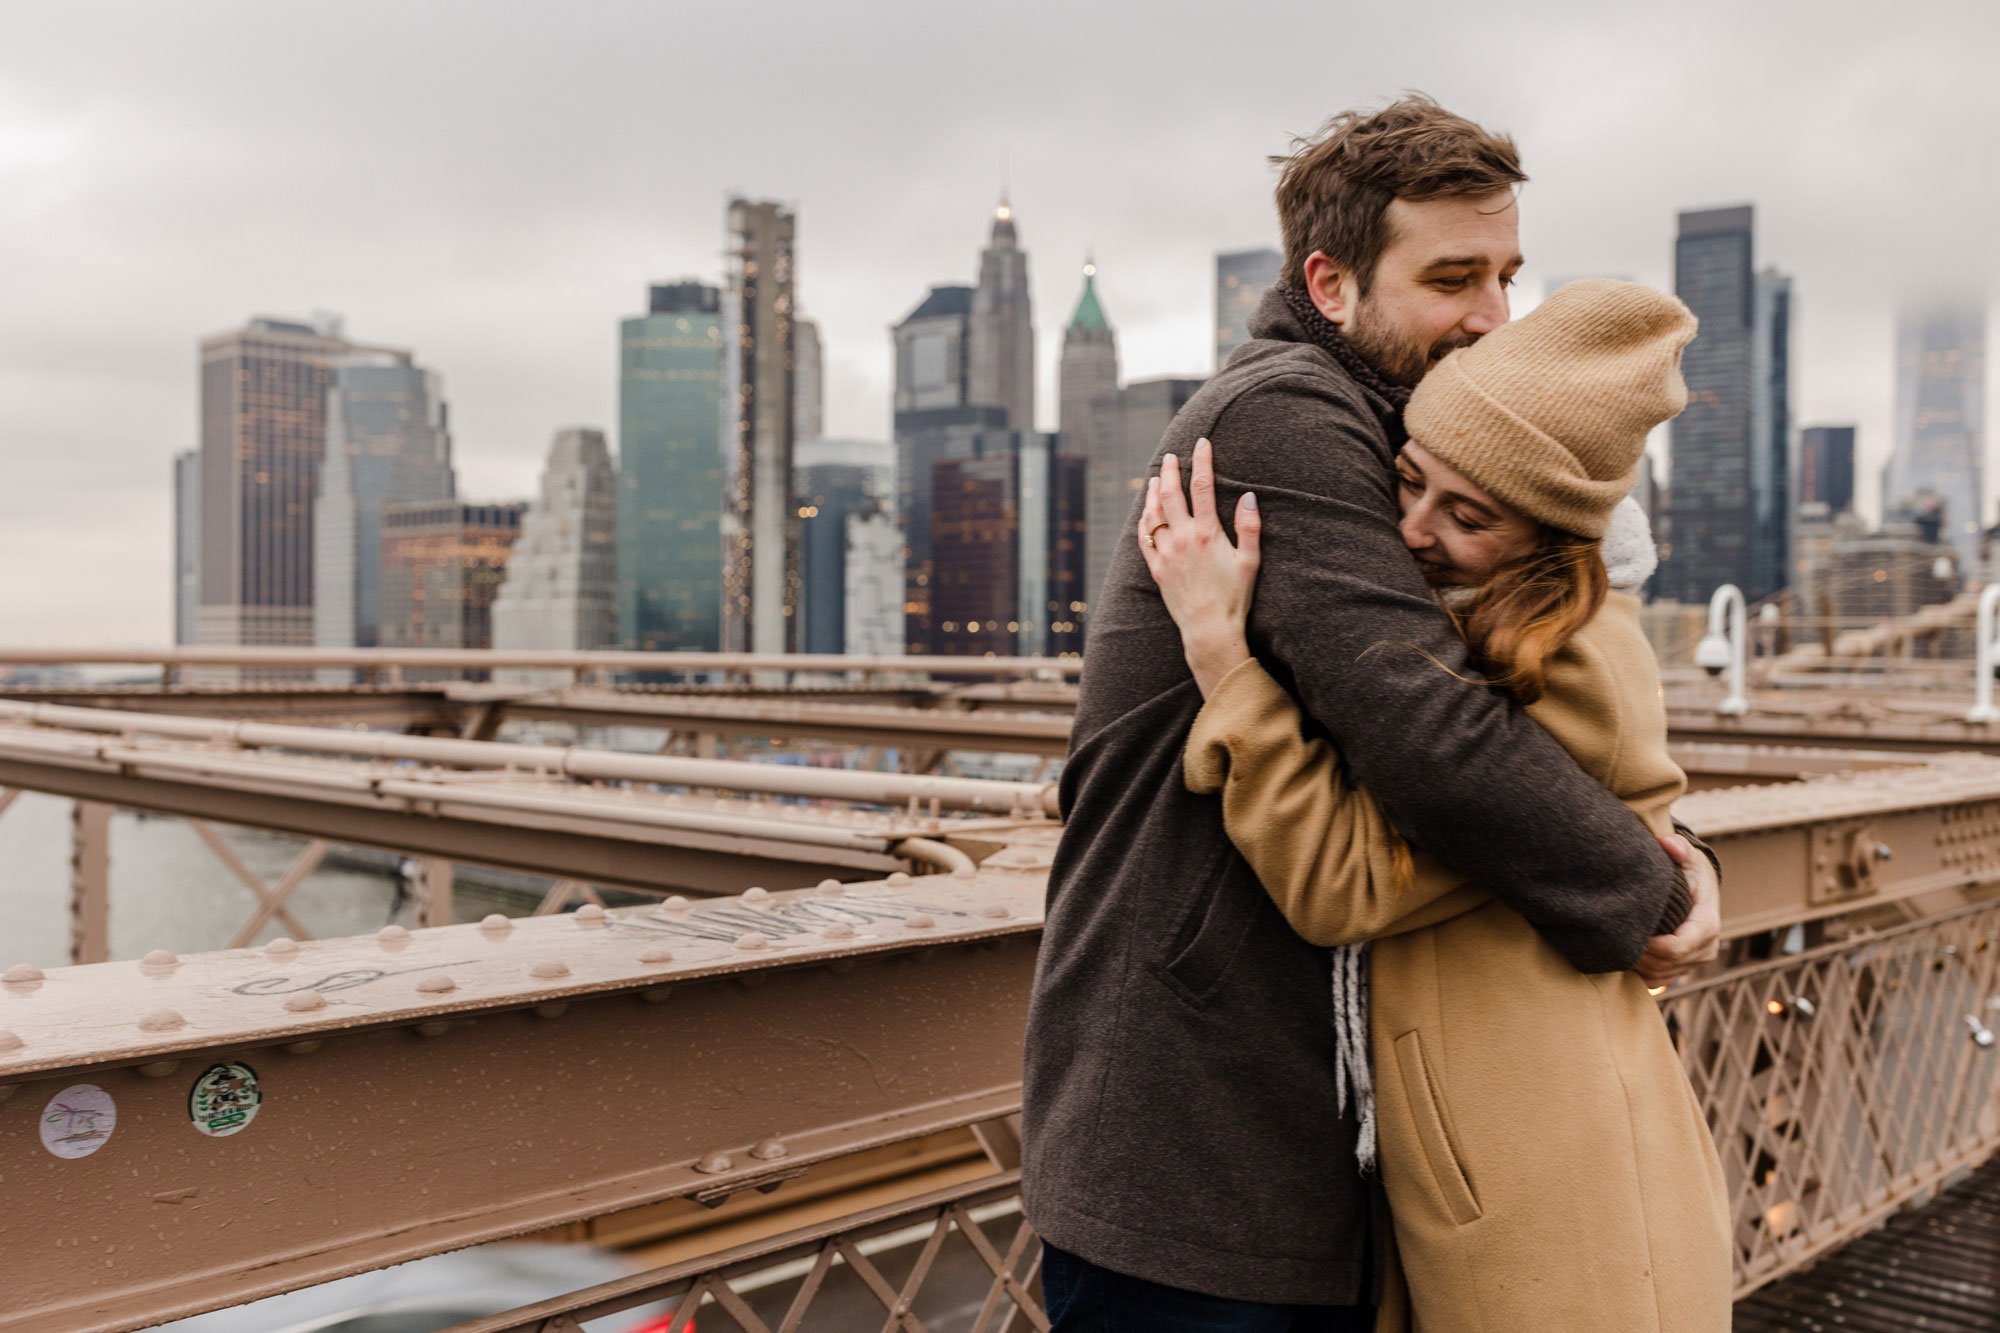 An engaged couple embracing on the Brooklyn Bridge